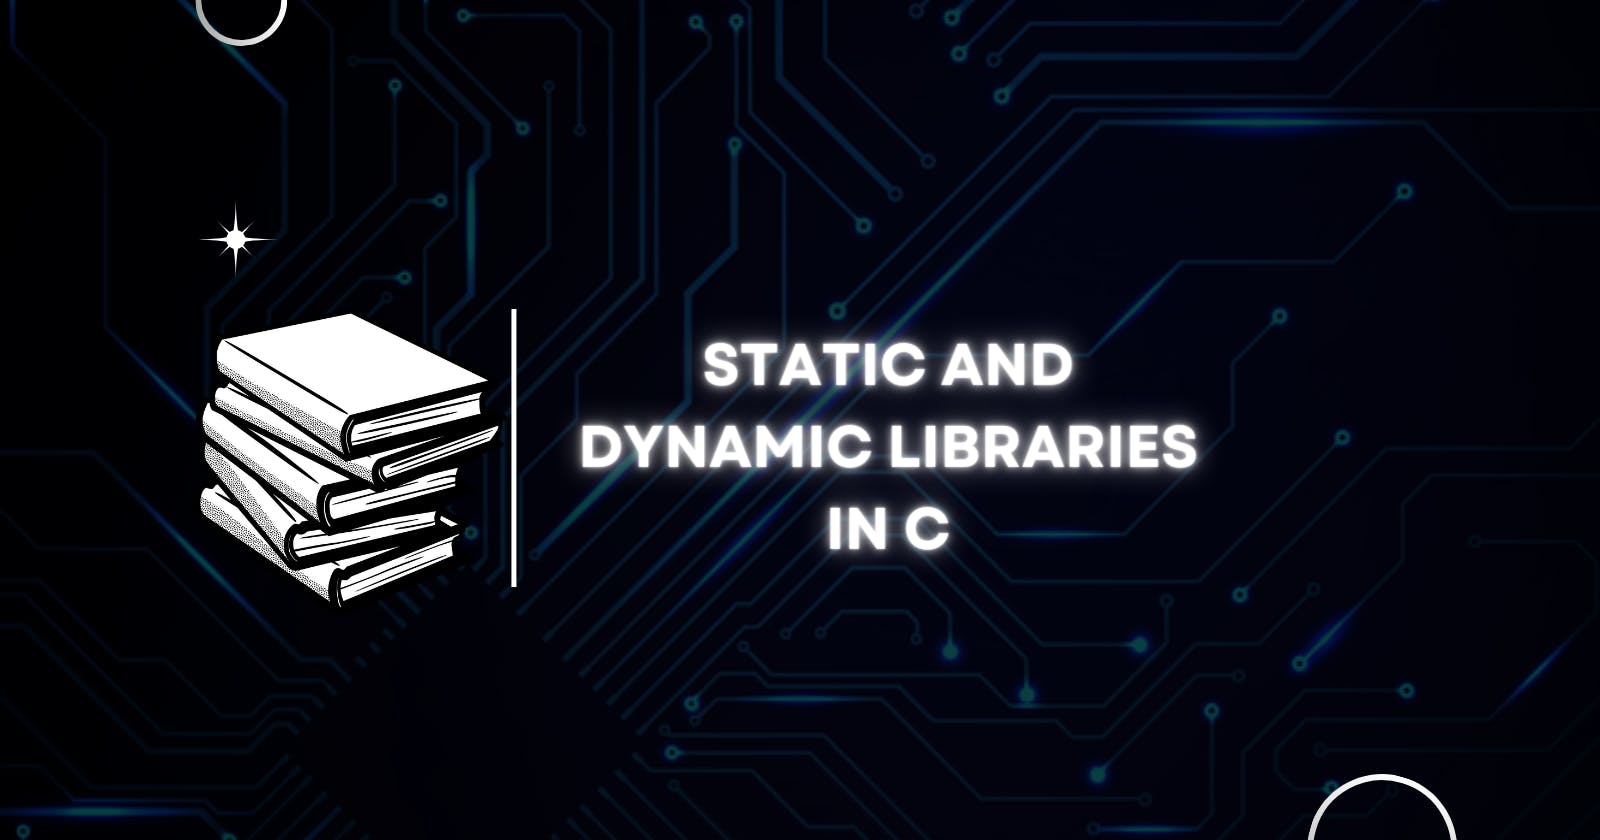 Static and dynamic libraries In C